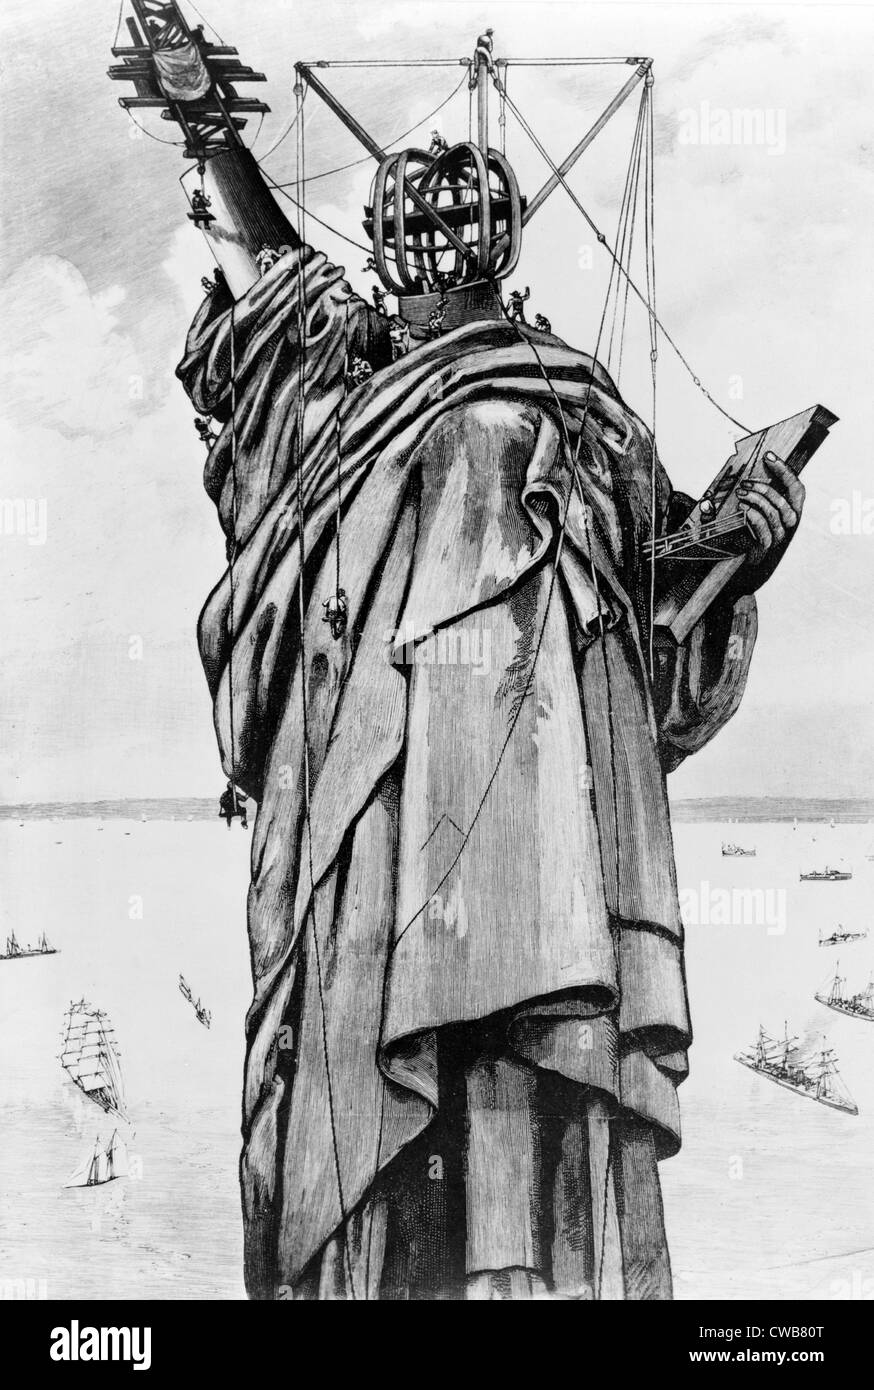 Statue of Liberty. Construction of the Statue of Liberty on Bedloe's Island. Engraving ca. 1886 Stock Photo